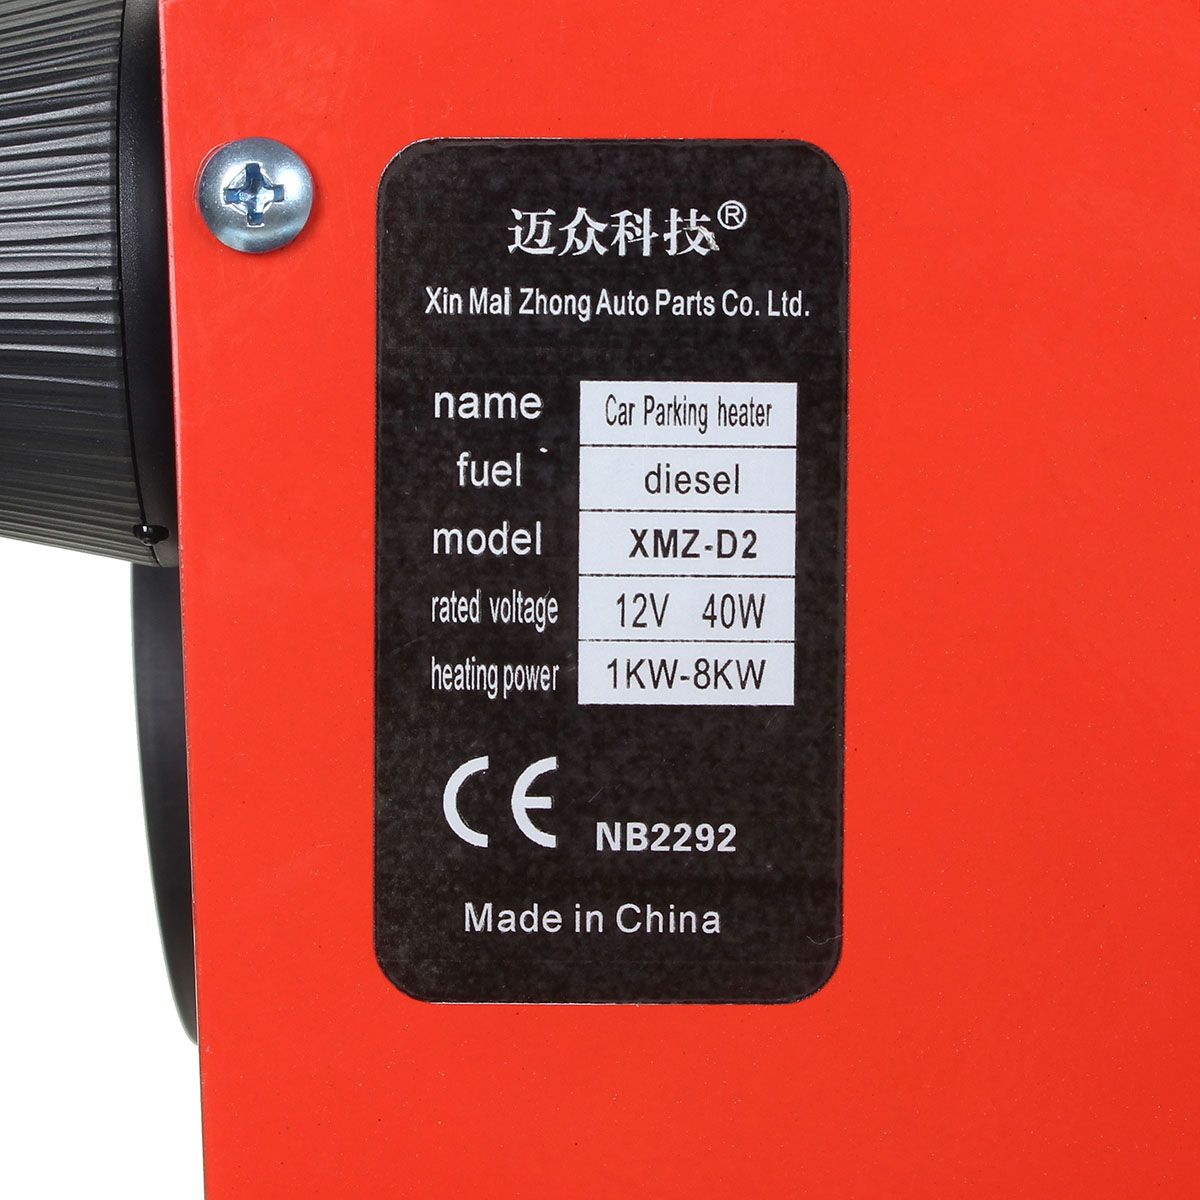 Red-All-In-One-12V-8KW-Diesel-Air-Heater-Car-Parking-Heater-1573213